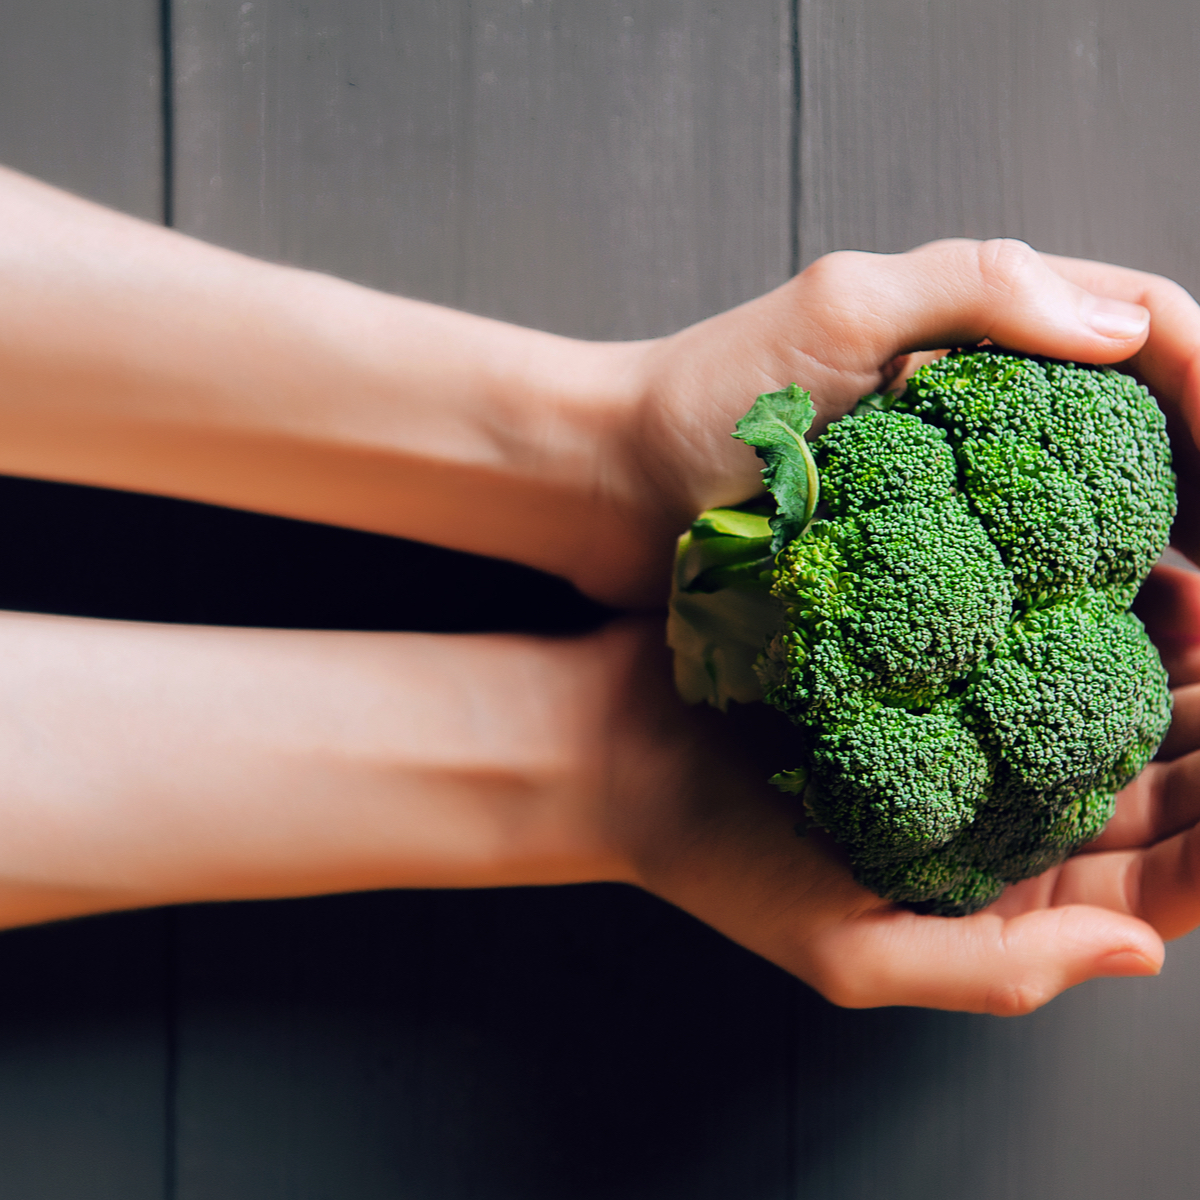 Broccoli: Benefits, Nutritional Content and More